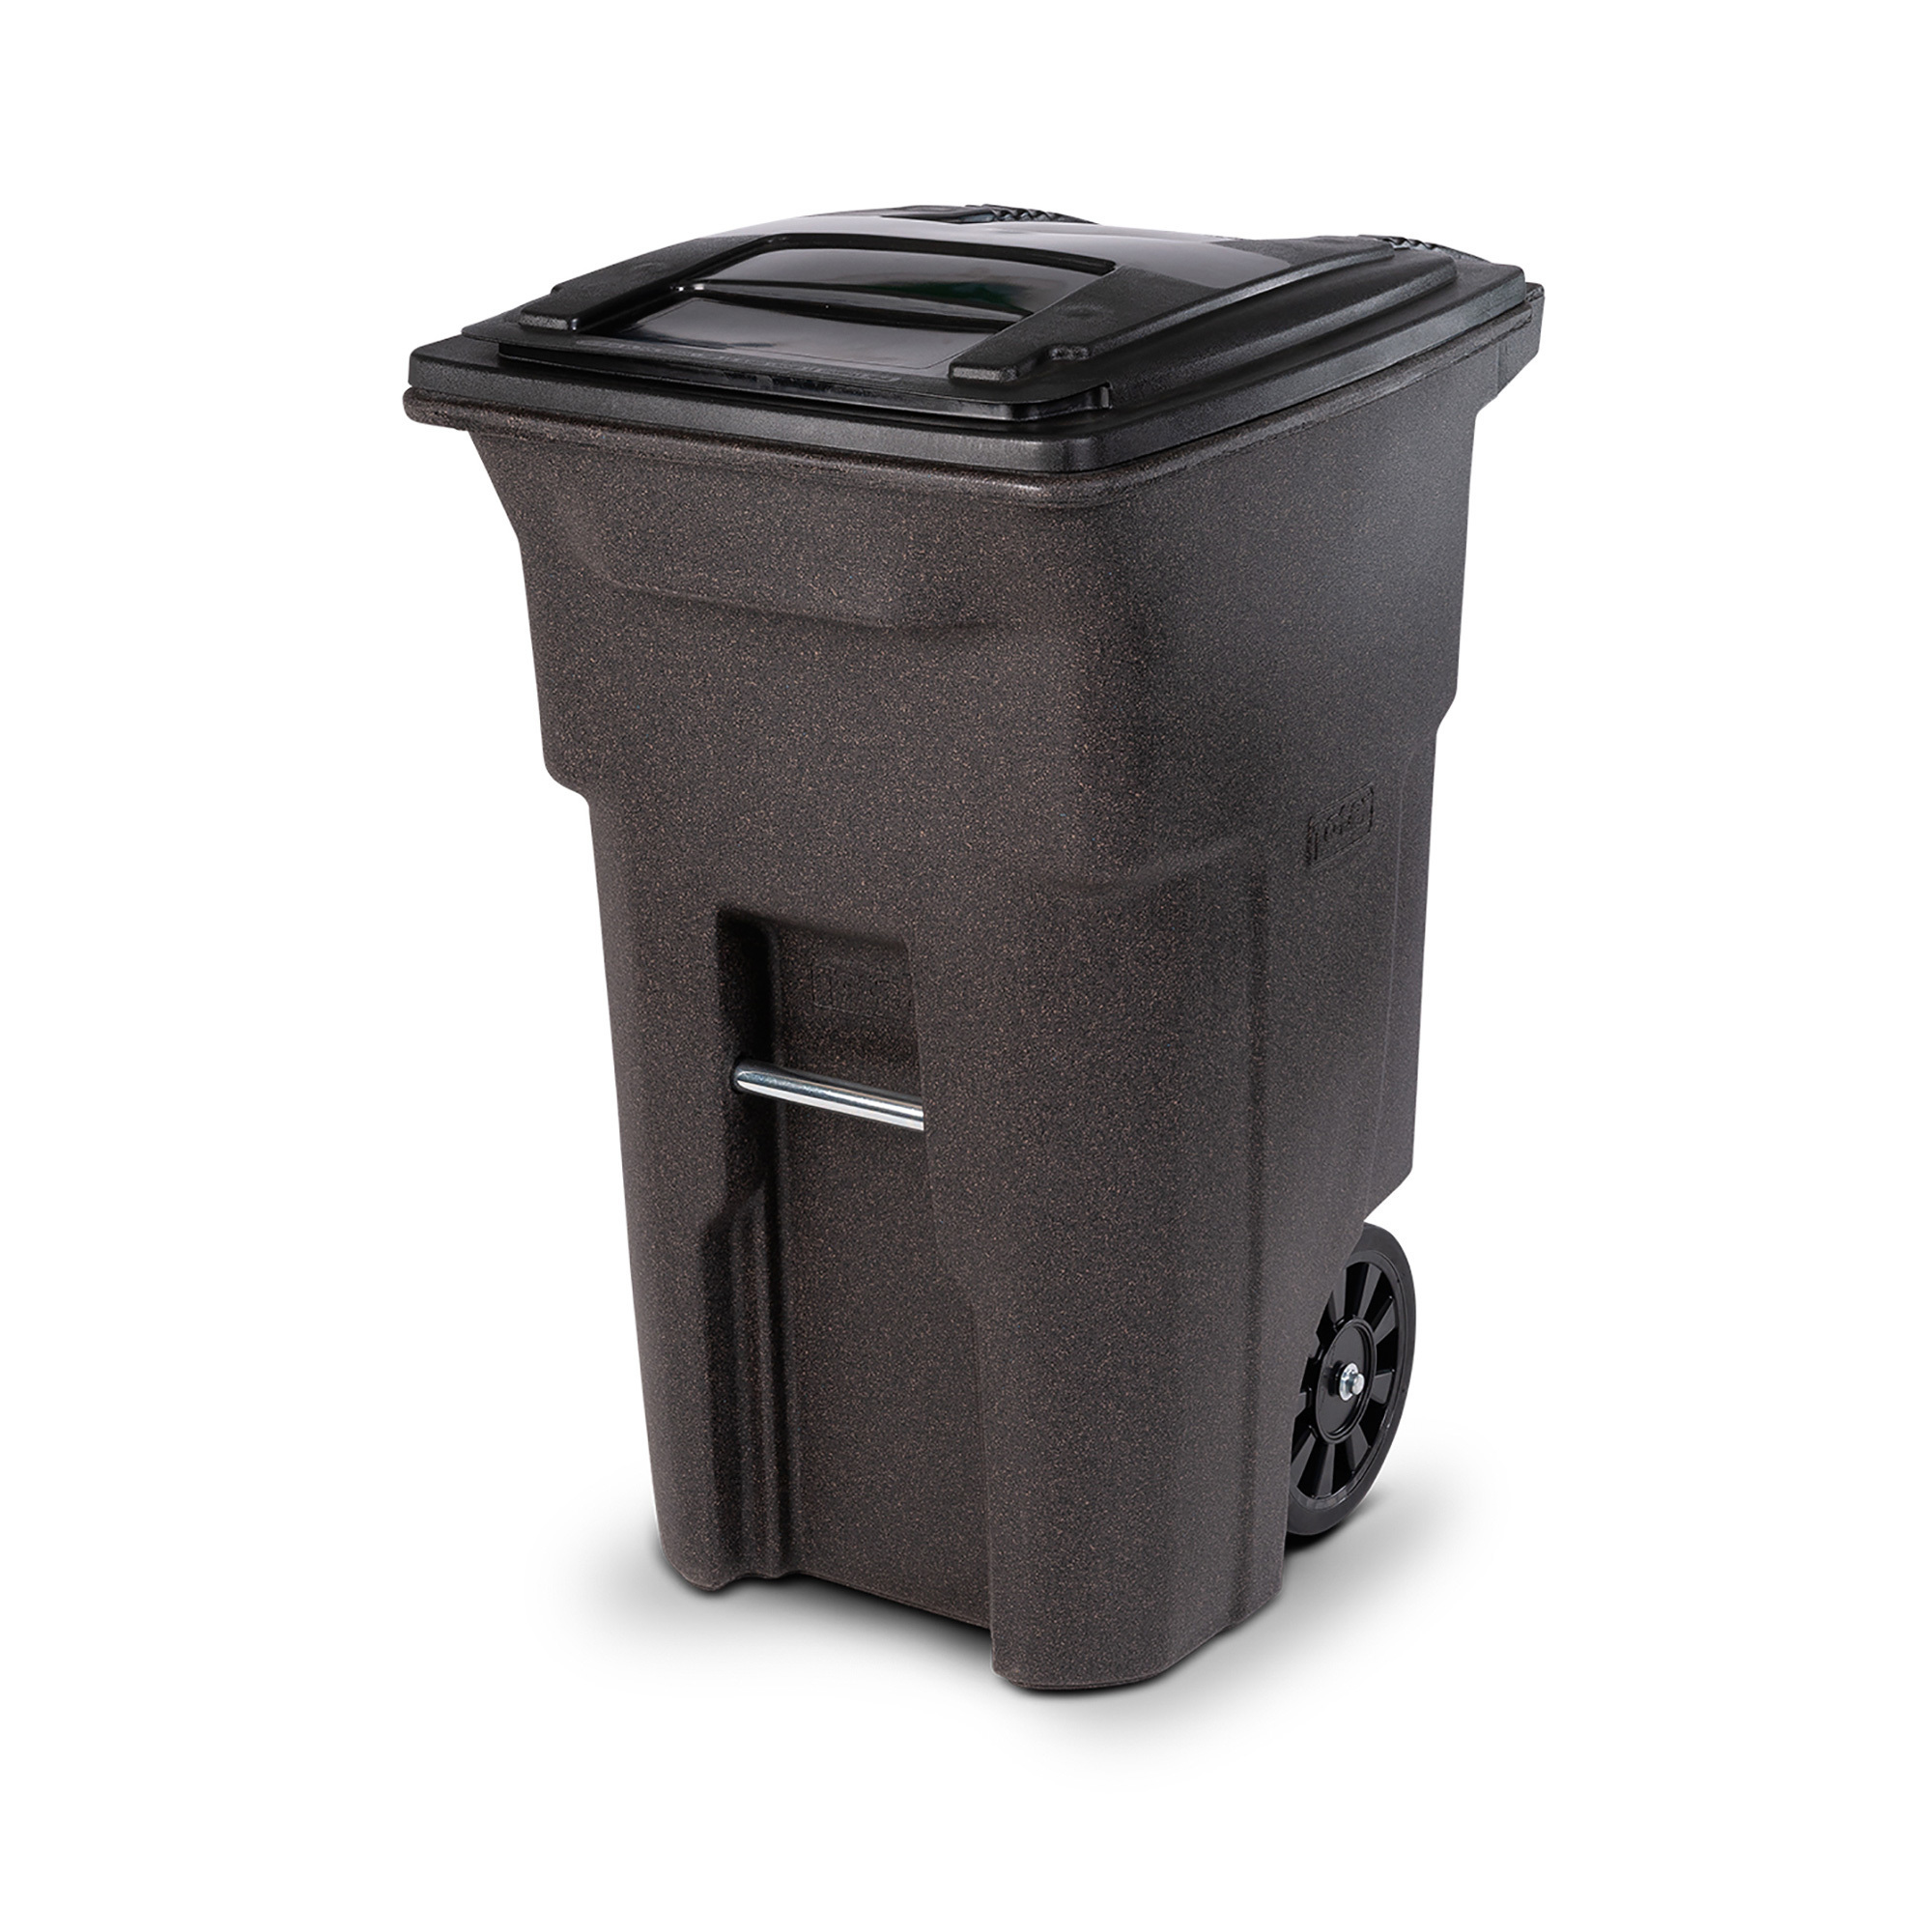 Toter 64 Gal. Brownstone Trash Can with Wheels and Lid (2 caster